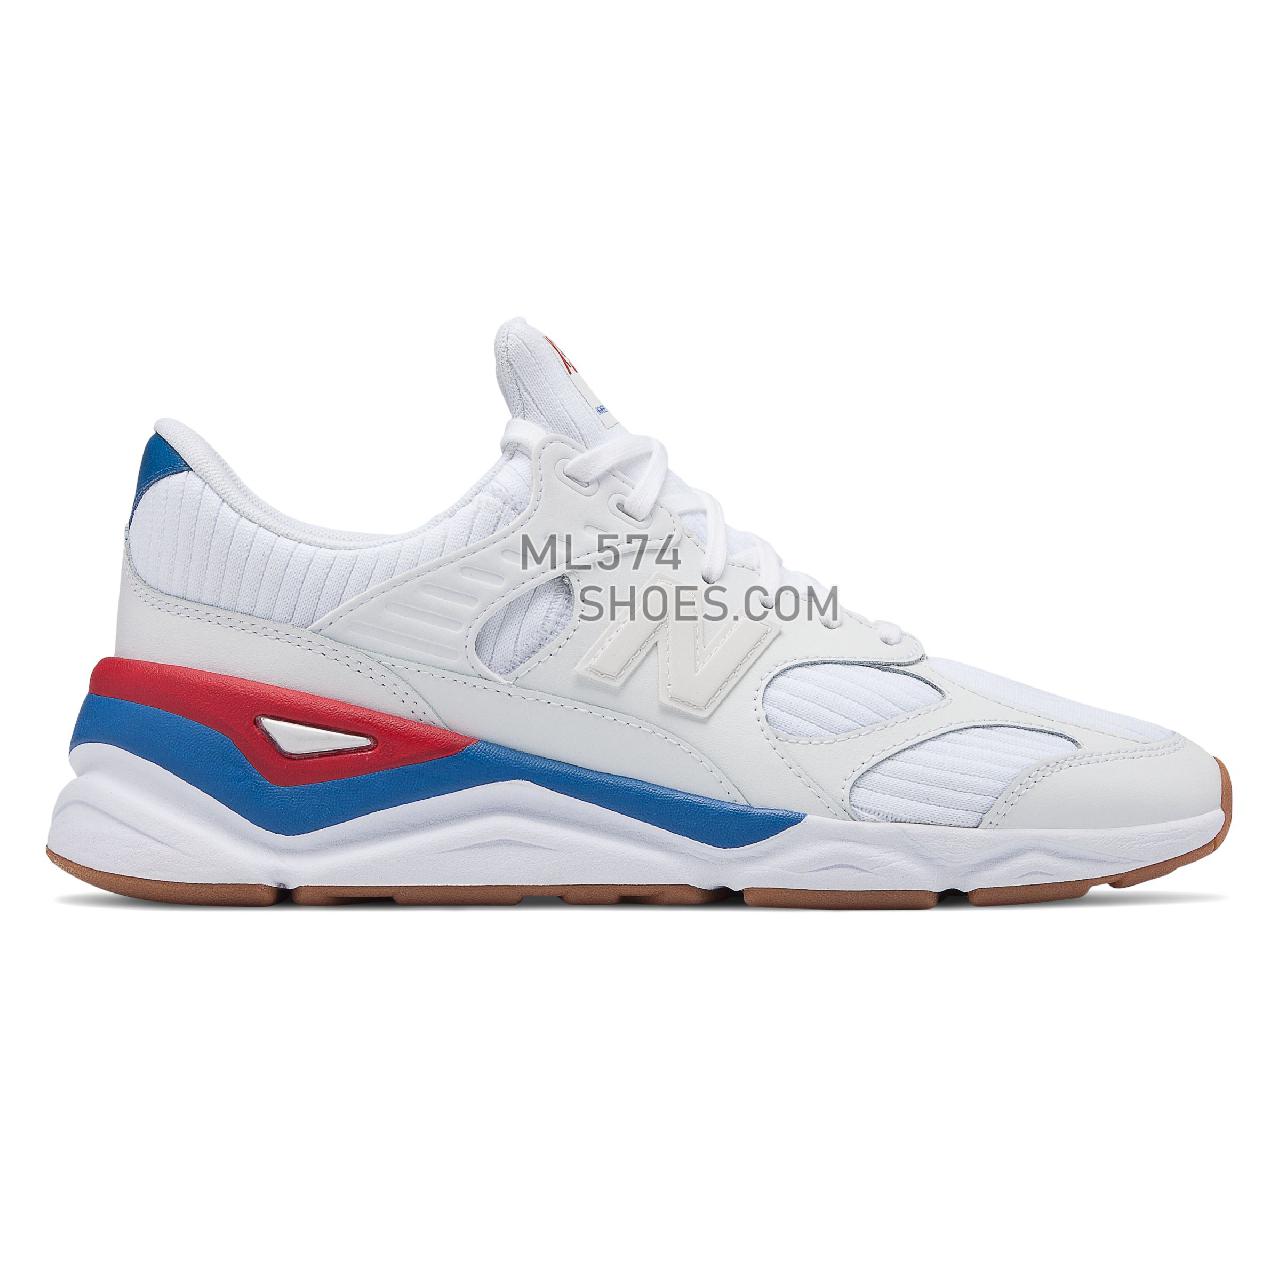 New Balance X-90 - Men's 90 - Classic Munsell White with Classic Blue and Chilli Pepper - MSX90RWB